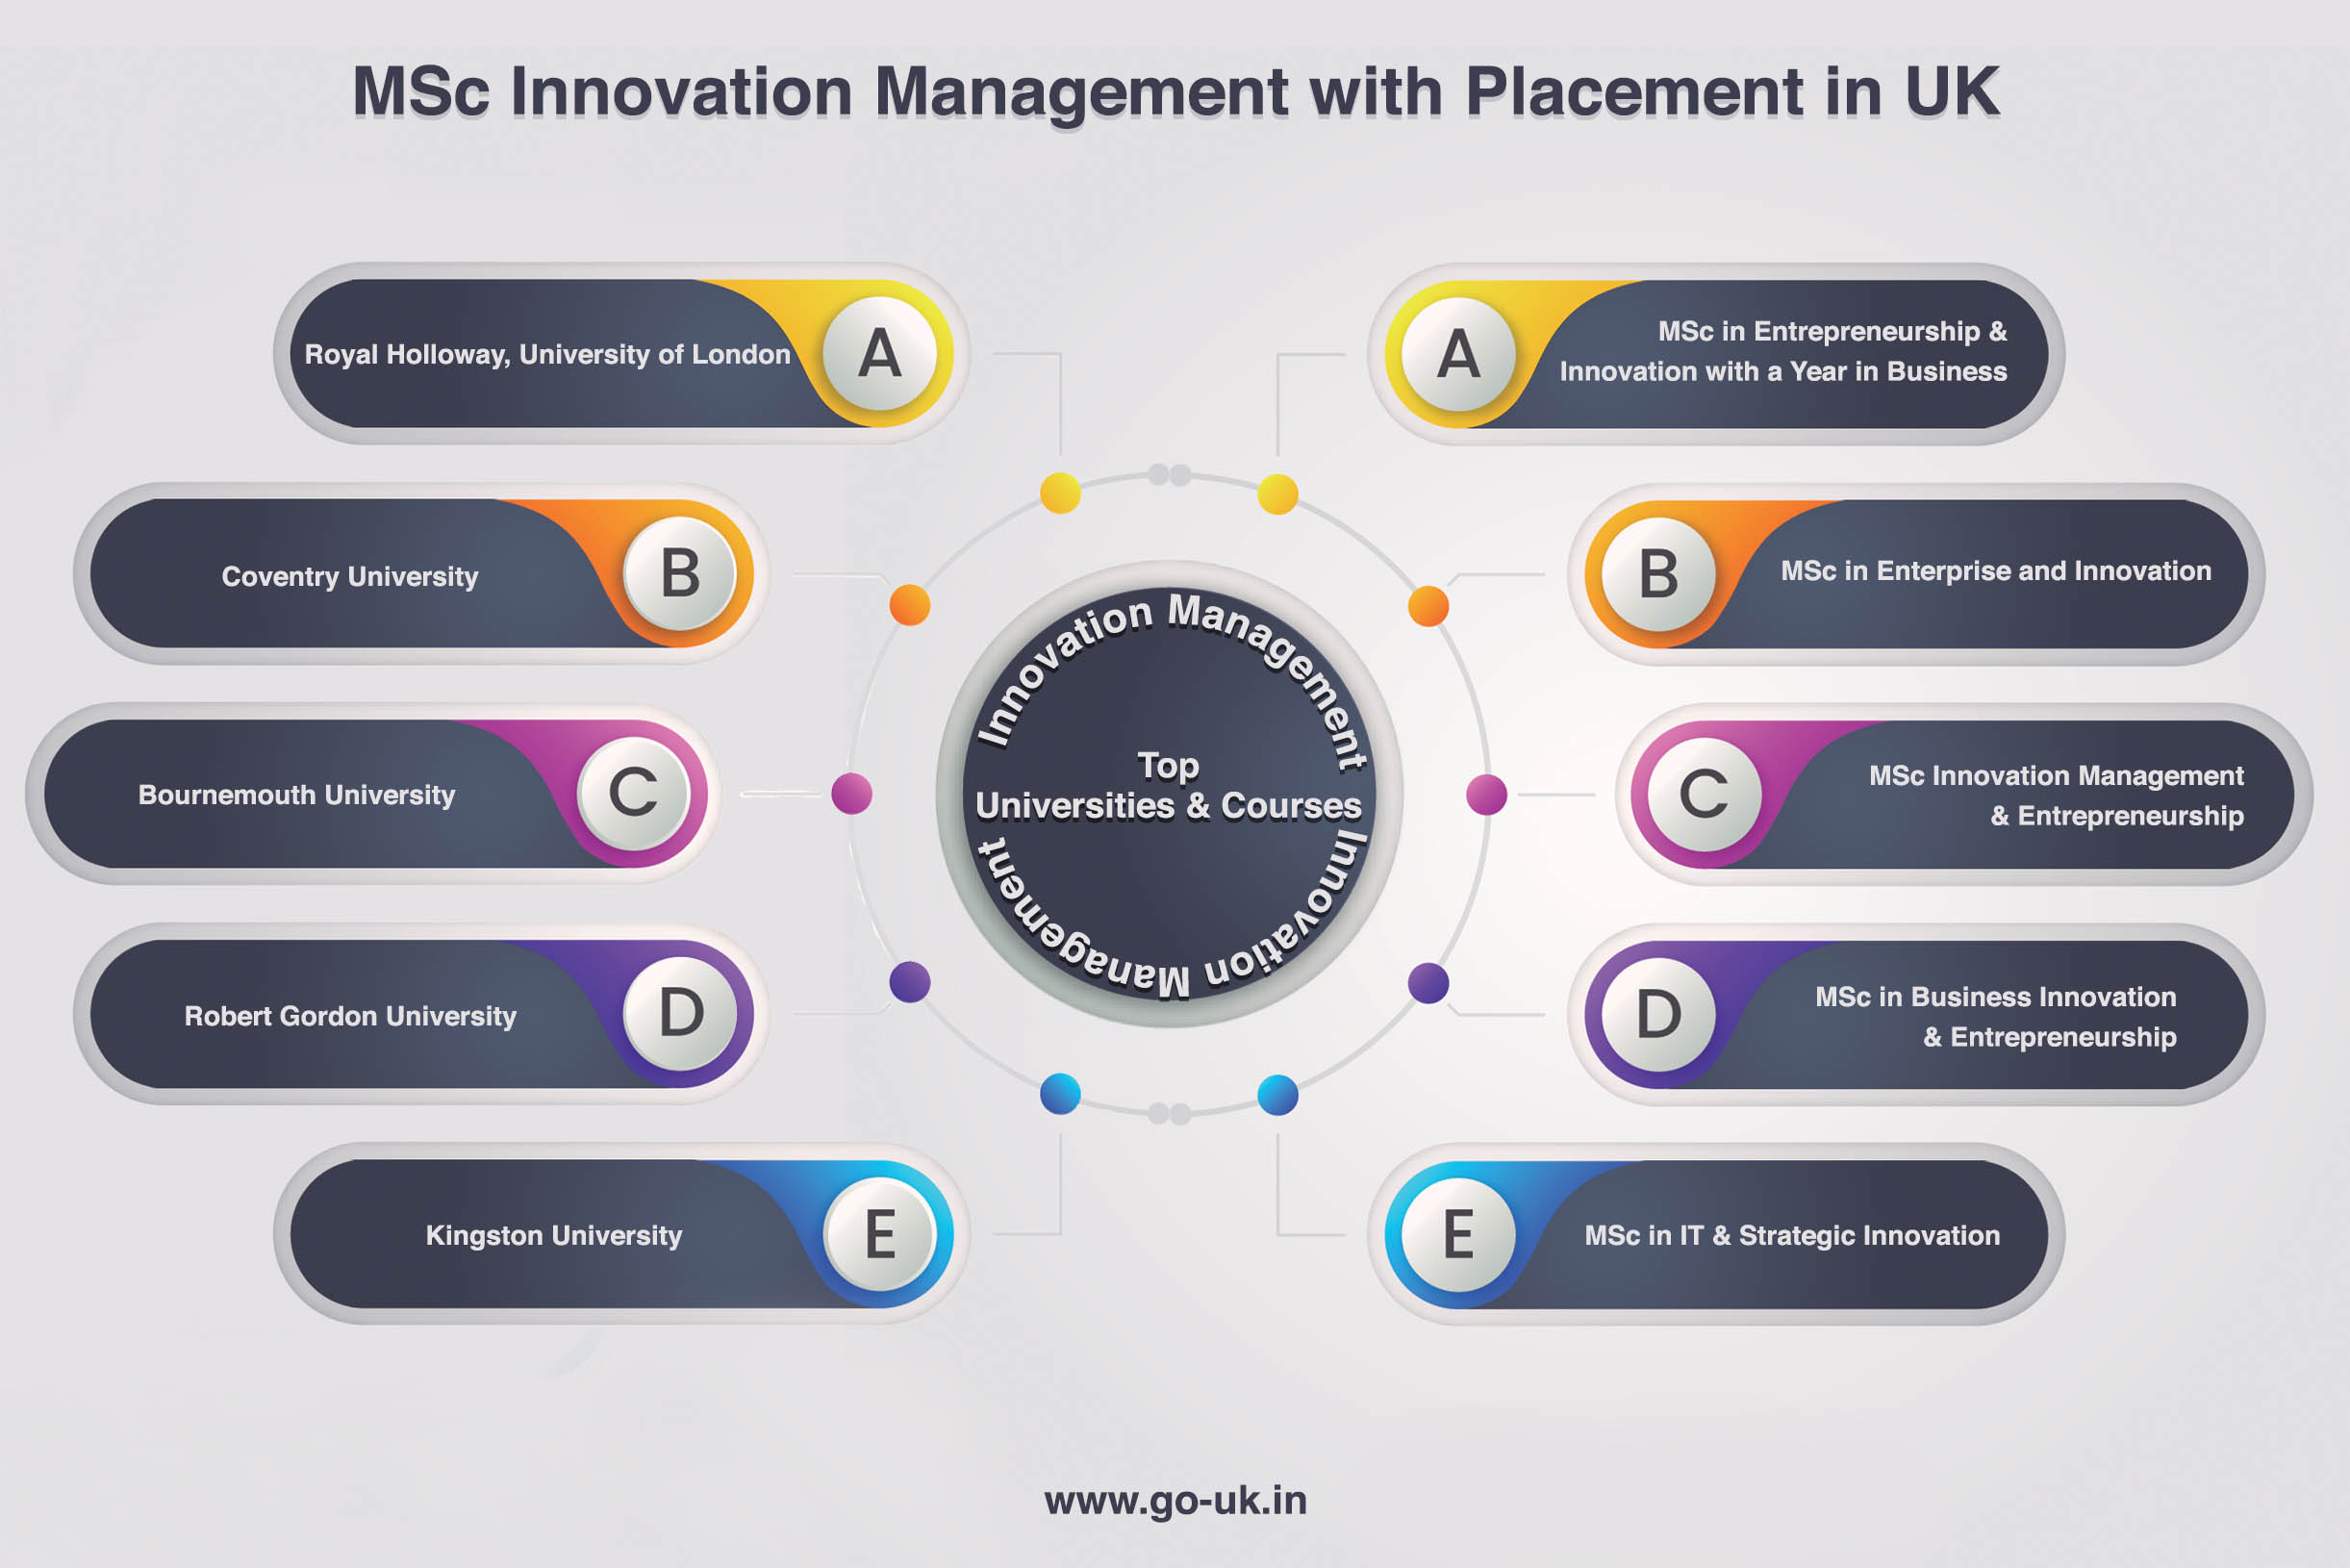 MSc Innovation Management With Placement in UK